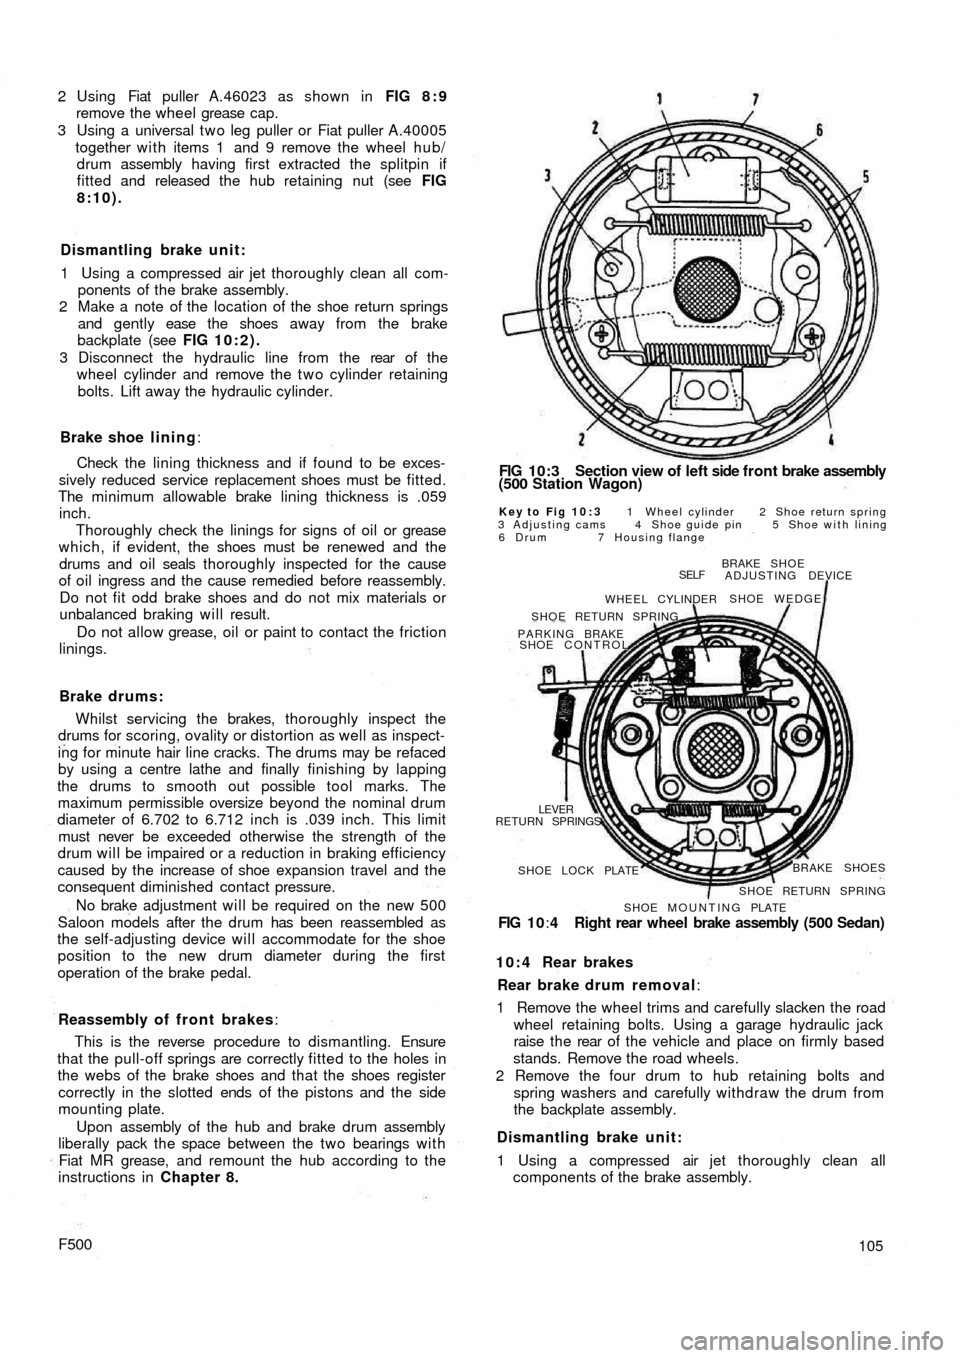 FIAT 500 1971 1.G User Guide 2 Using  Fiat puller A.46023 as shown in FIG 8 : 9
remove the wheel grease cap.
3 Using a universal t w o leg puller or Fiat puller A.40005
together w i t h items 1  and 9 remove the wheel hub/
drum a